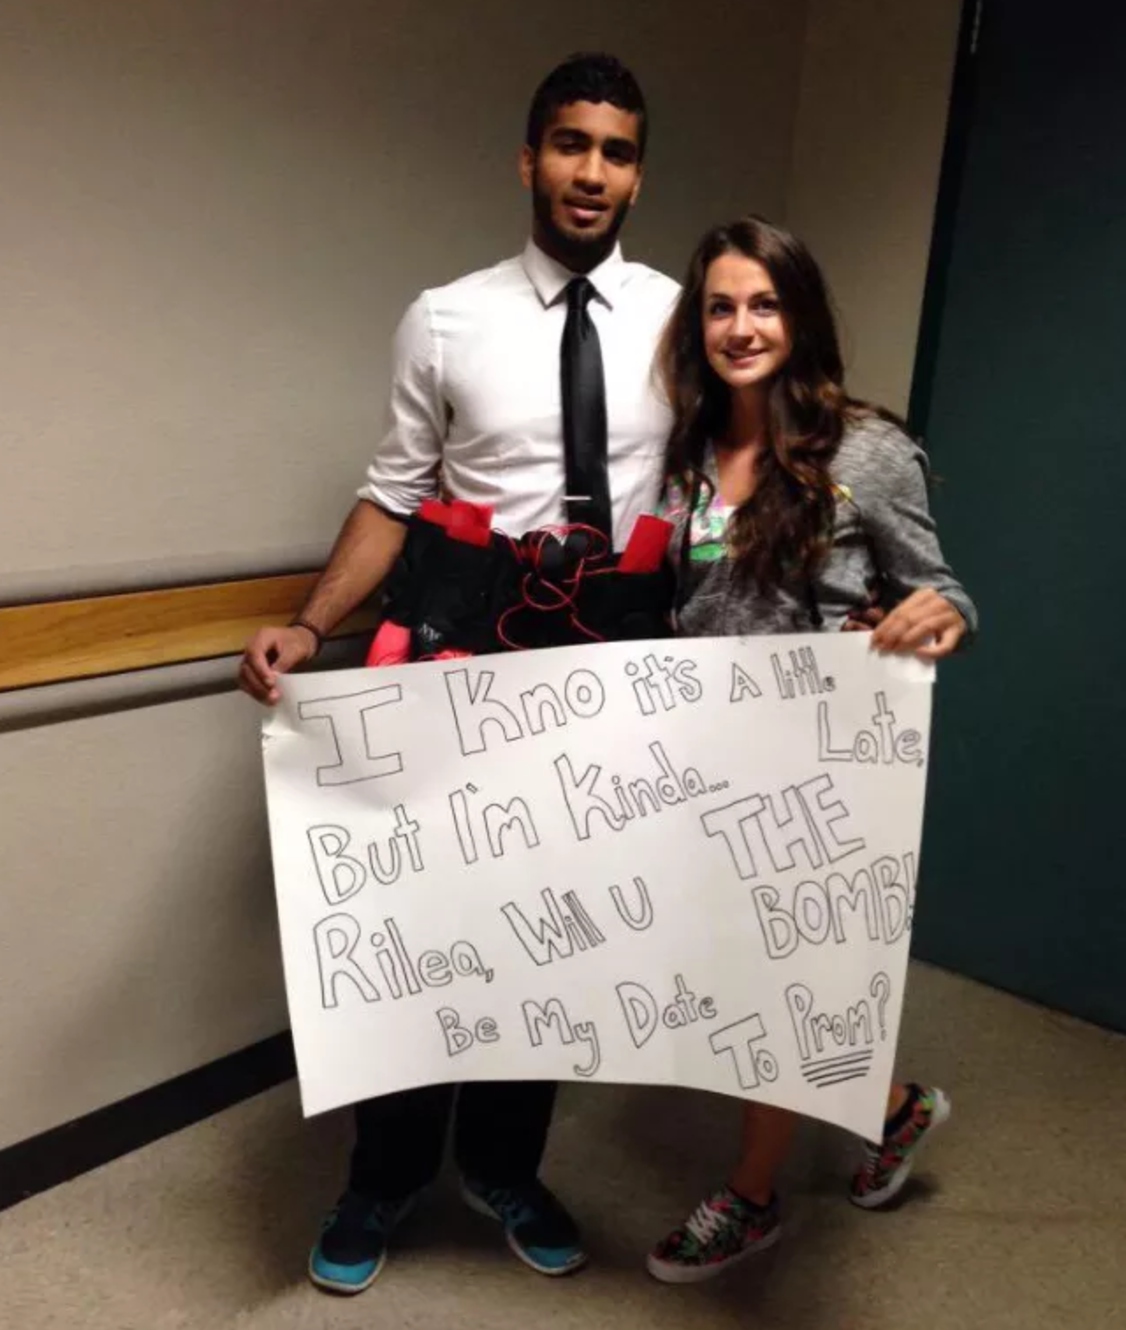 18 Of The Cringiest, Over The Top, And Racist Prom Proposals